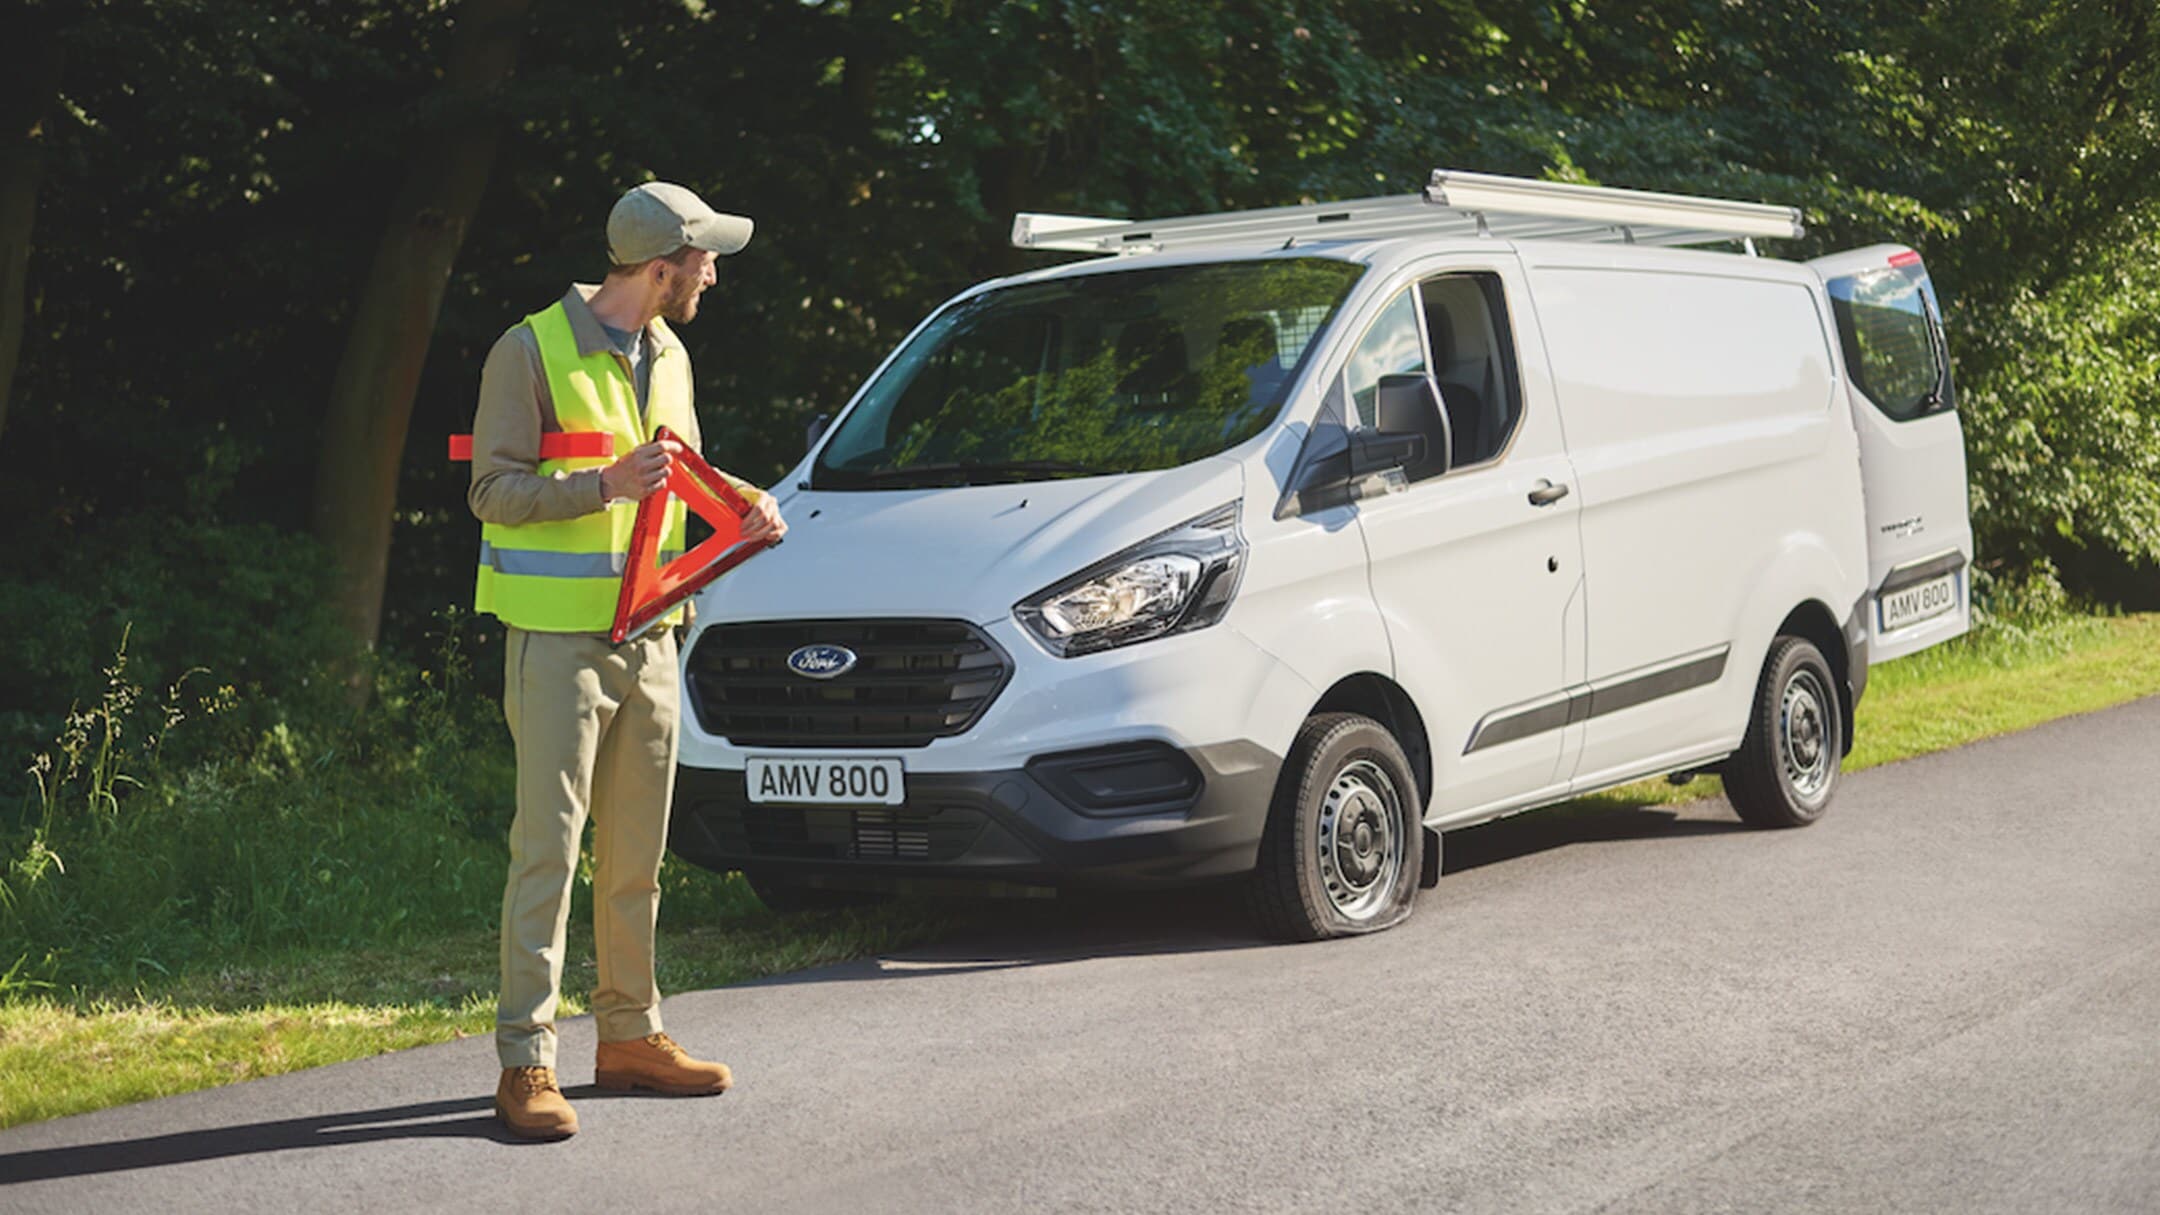 Every Ford Service now comes with free UK and European Roadside Assistance 